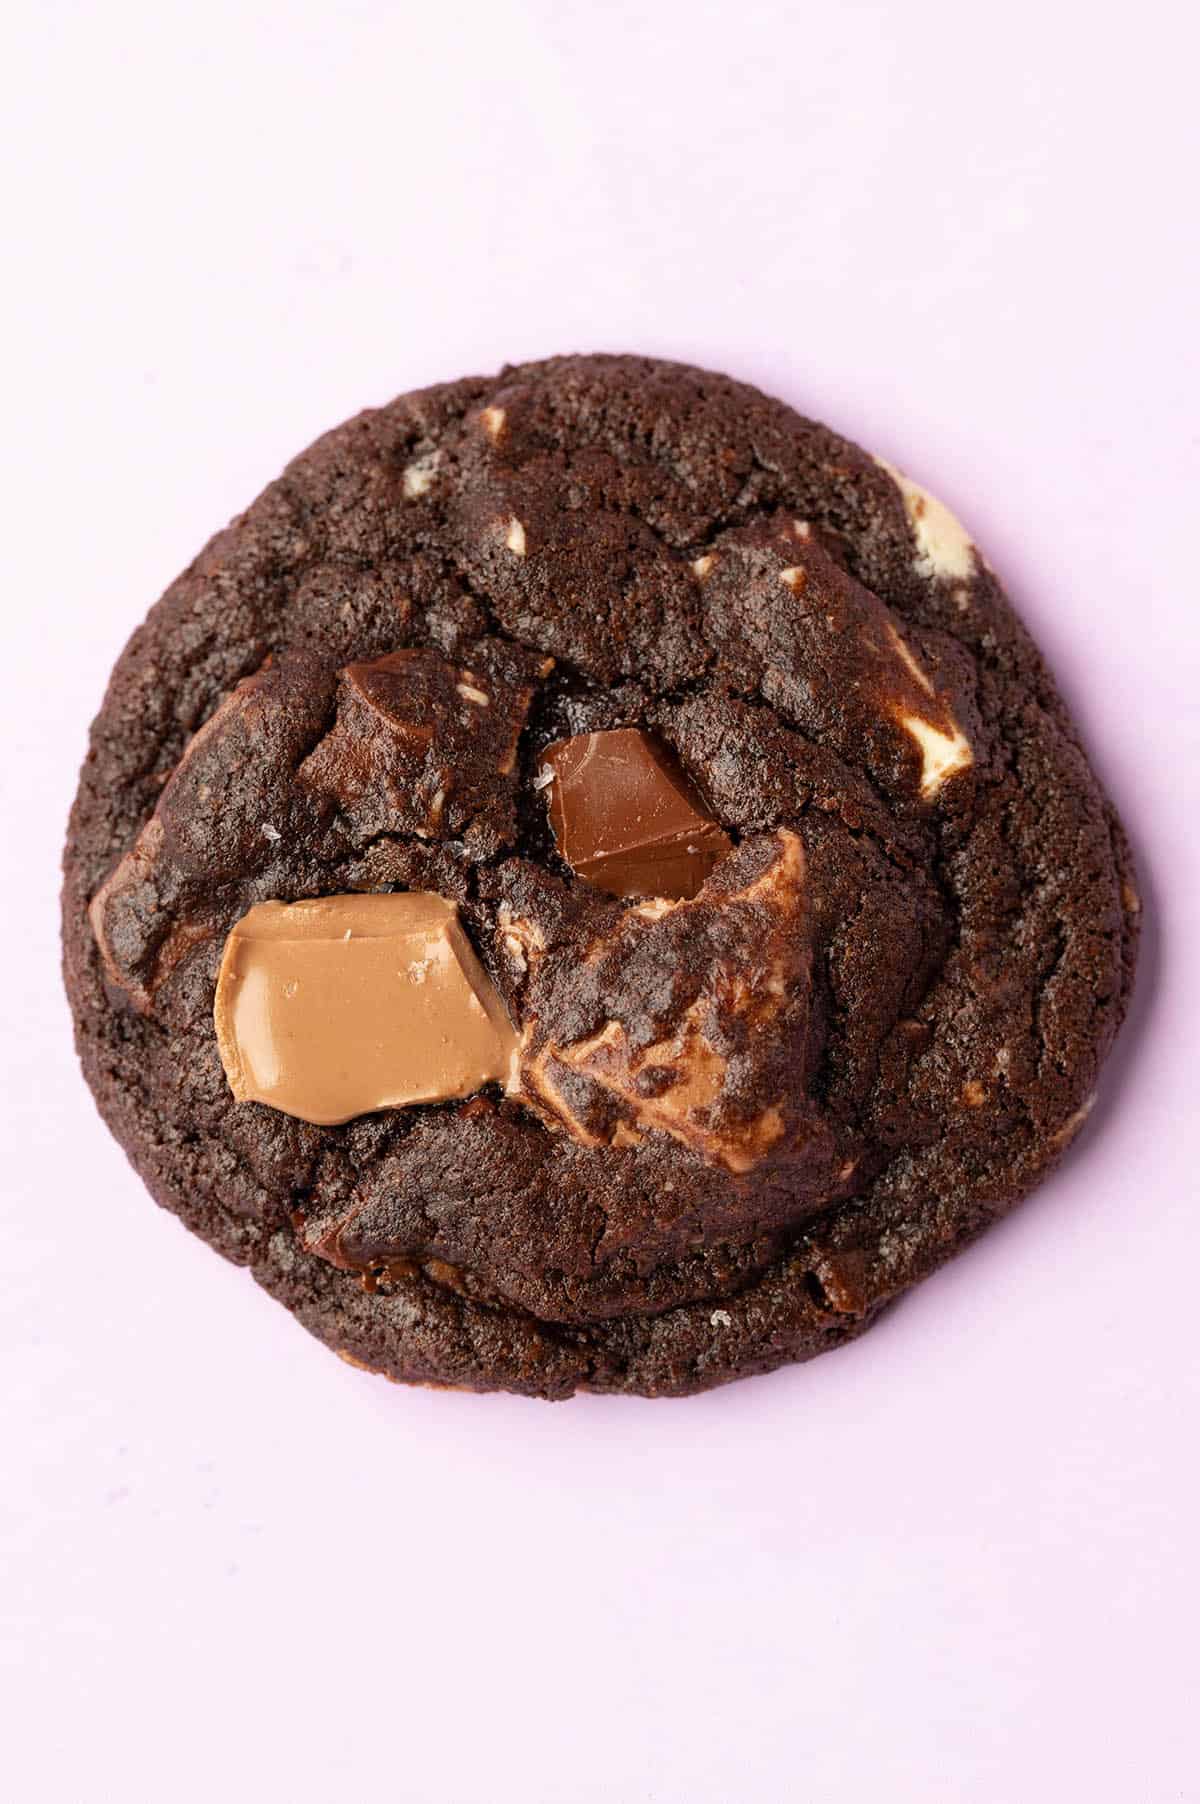 Top view of a Triple Chocolate Cookie sitting on a purple backdrop.